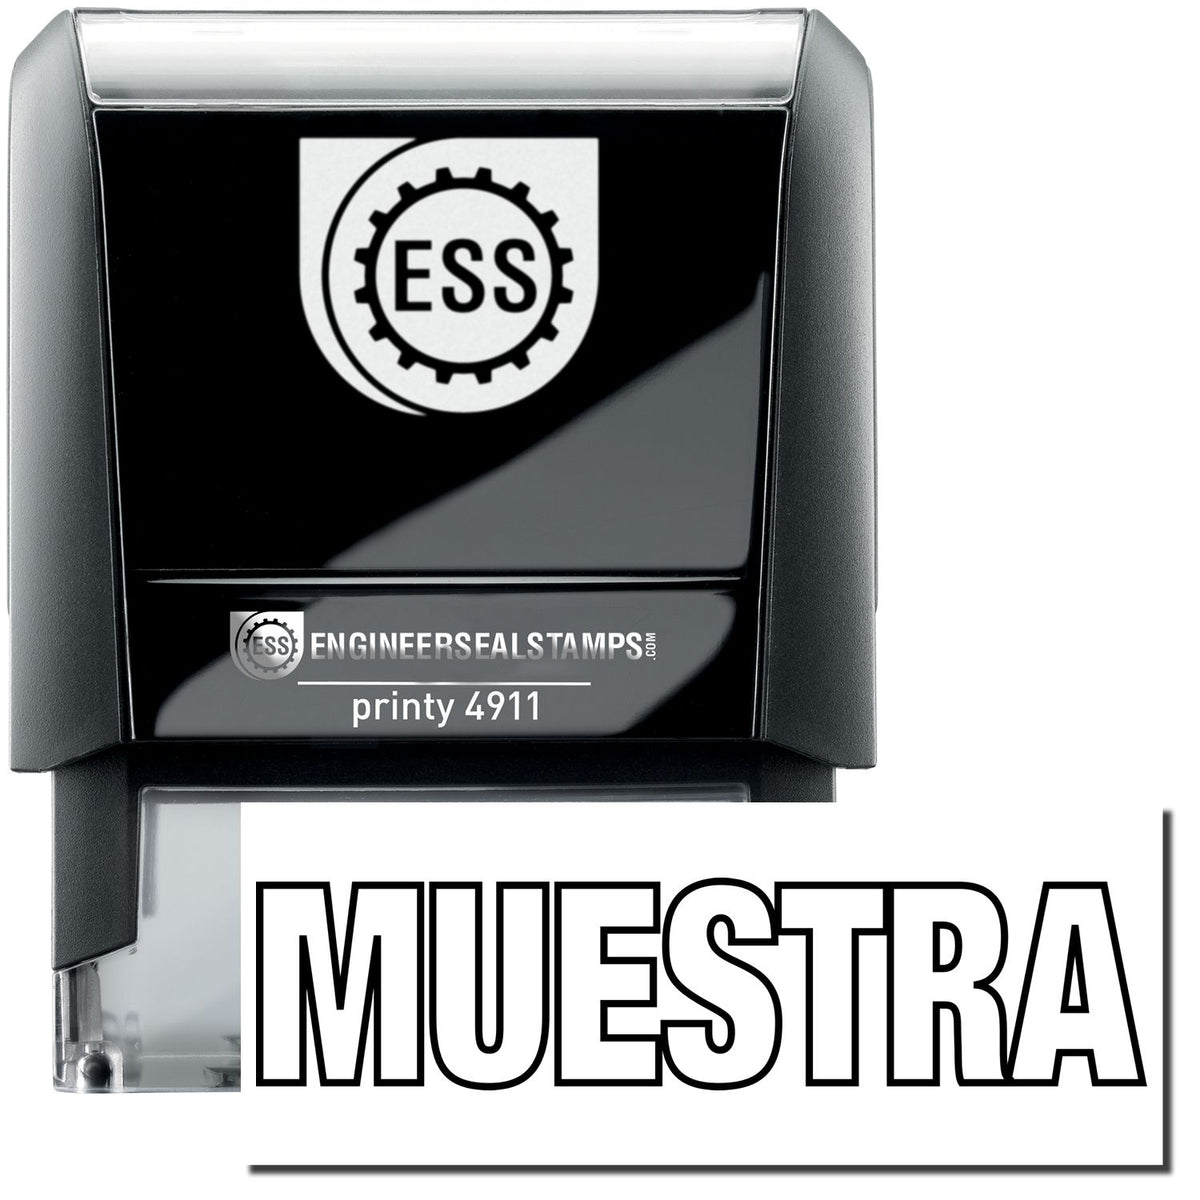 A self-inking stamp with a stamped image showing how the text &quot;MUESTRA&quot; in an outline style is displayed after stamping.